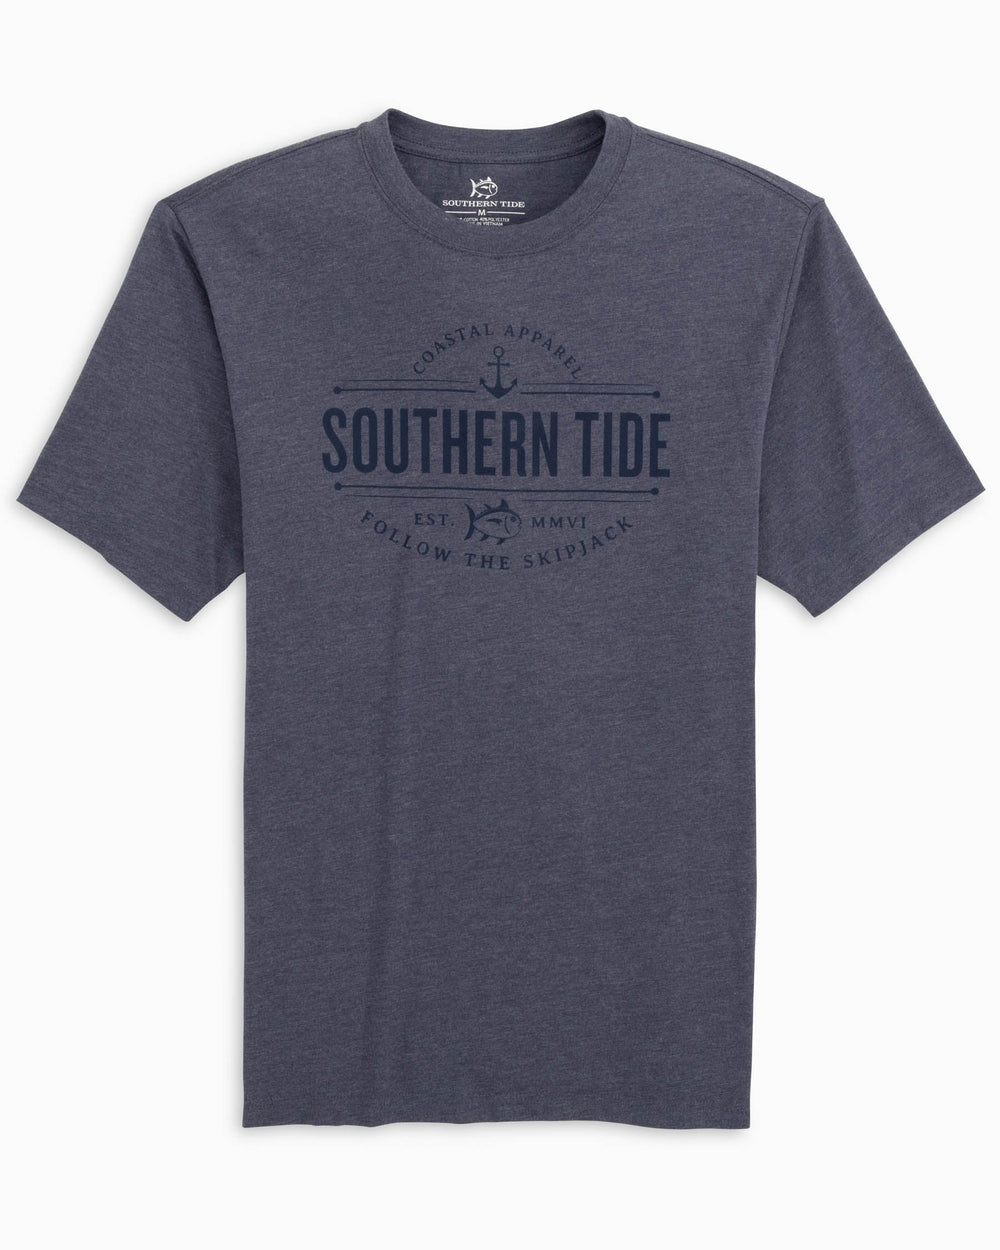 The front view of the Heather Southern Tide Coastal Apparel T-Shirt by Southern Tide - Heather True Navy